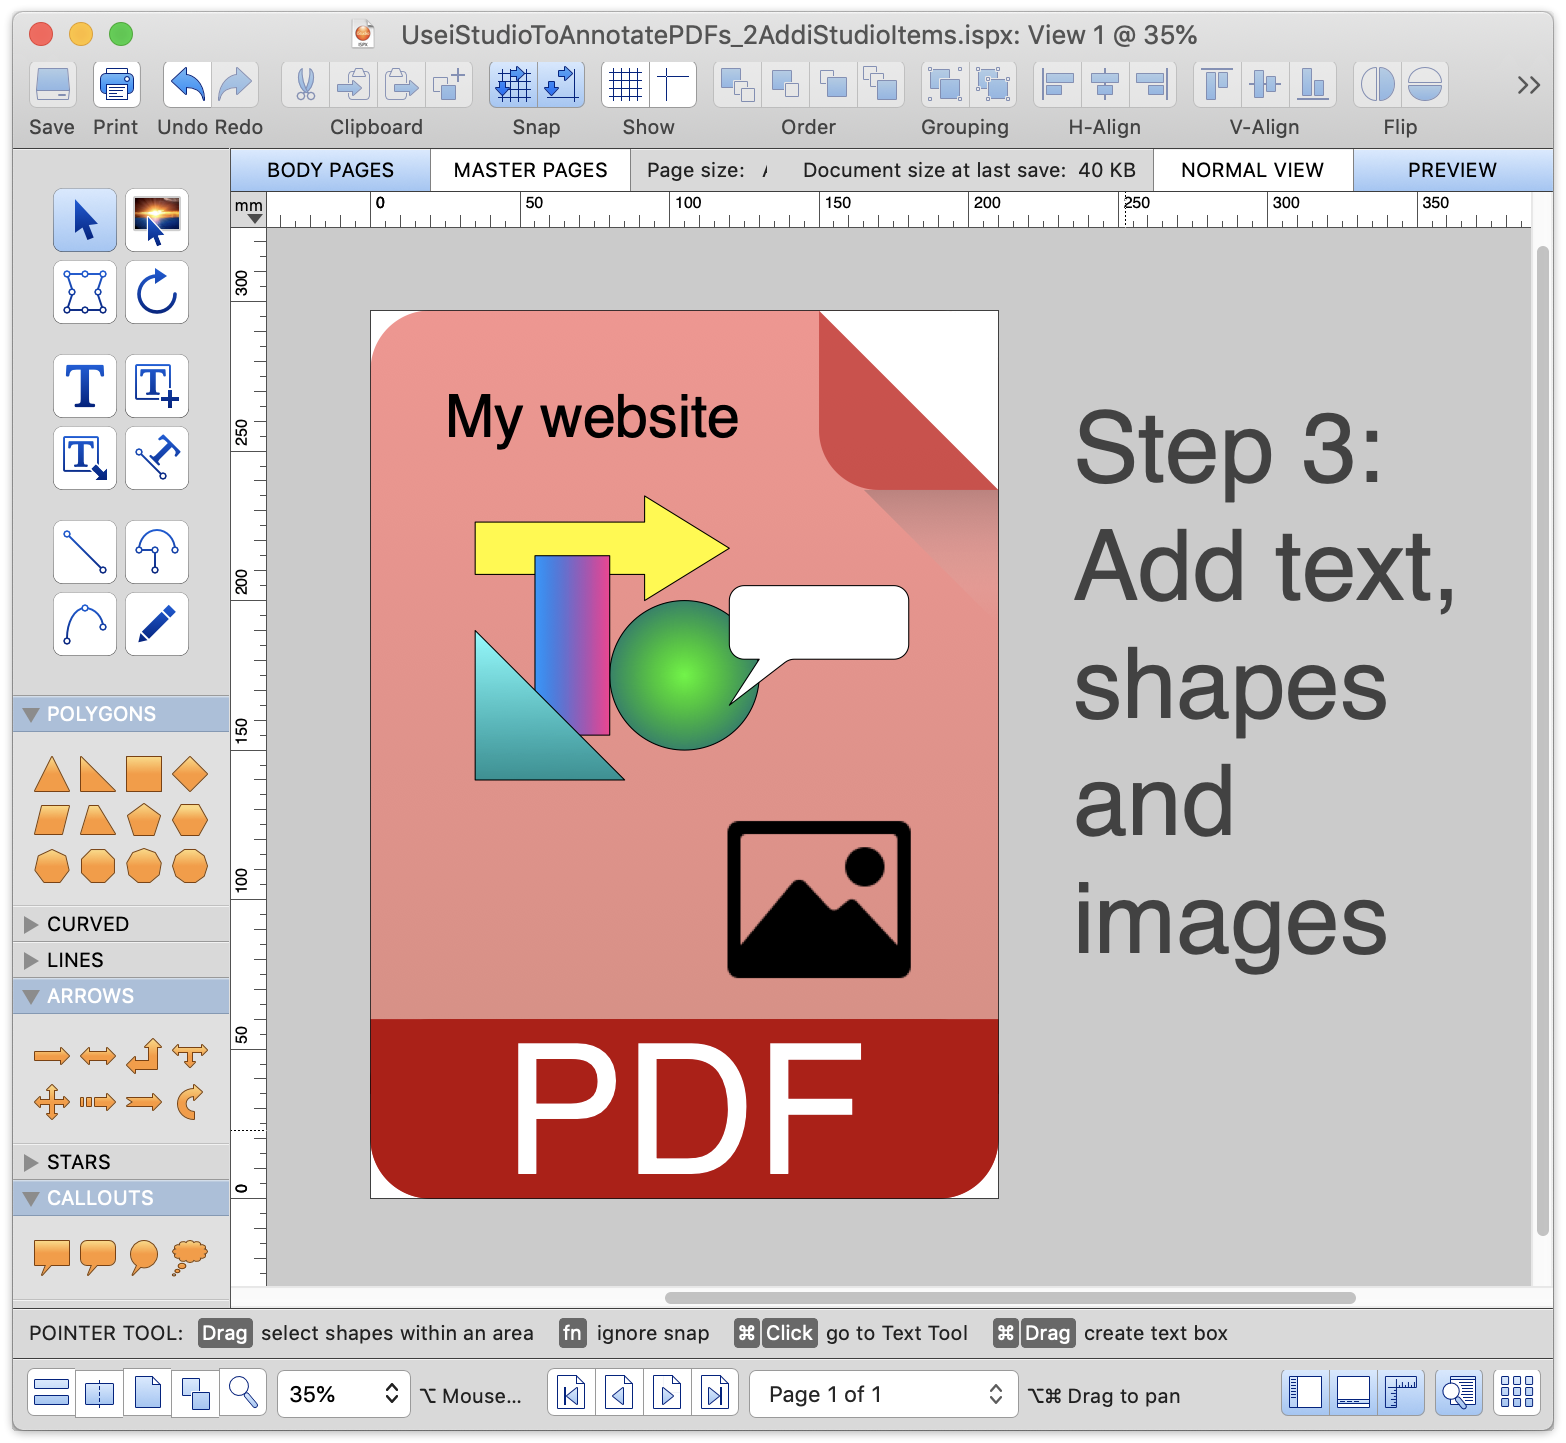 Annotate the PDF with text, shapes and images. Add hyperlinks to any of these items